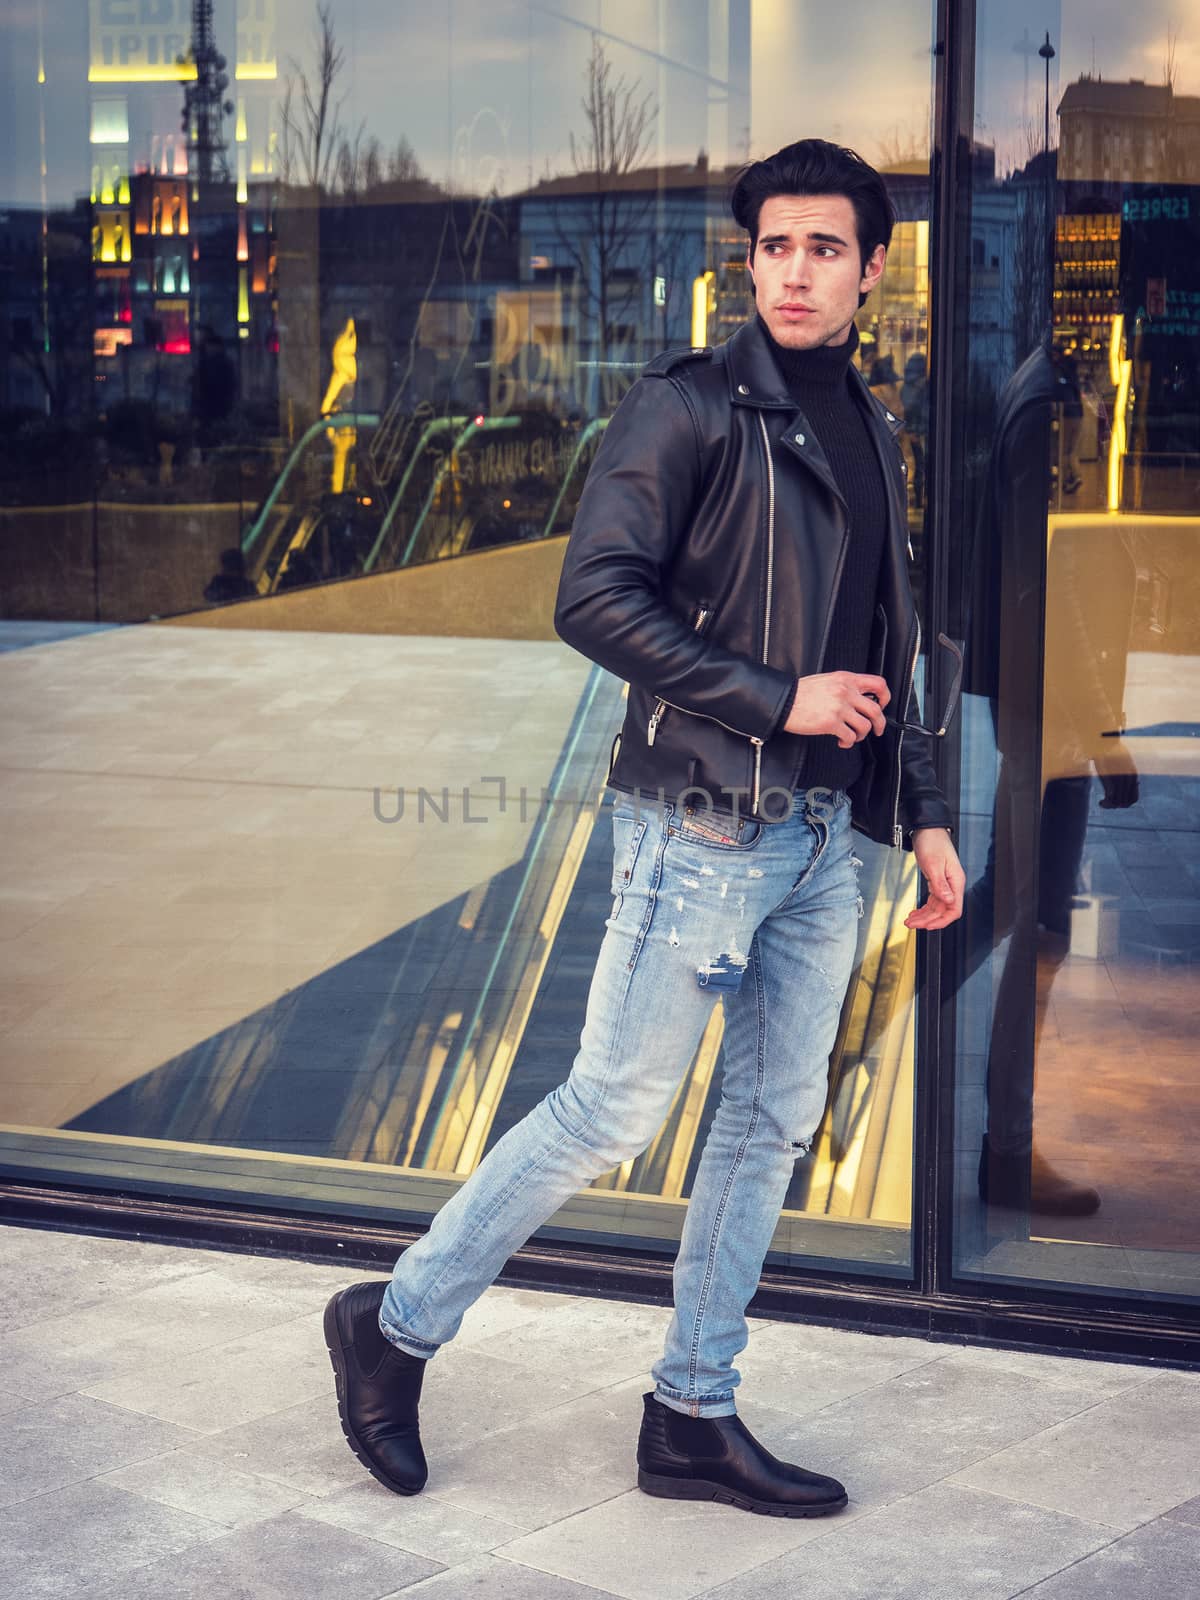 One handsome young man in urban setting in modern city, walking, wearing black leather jacket and jeans